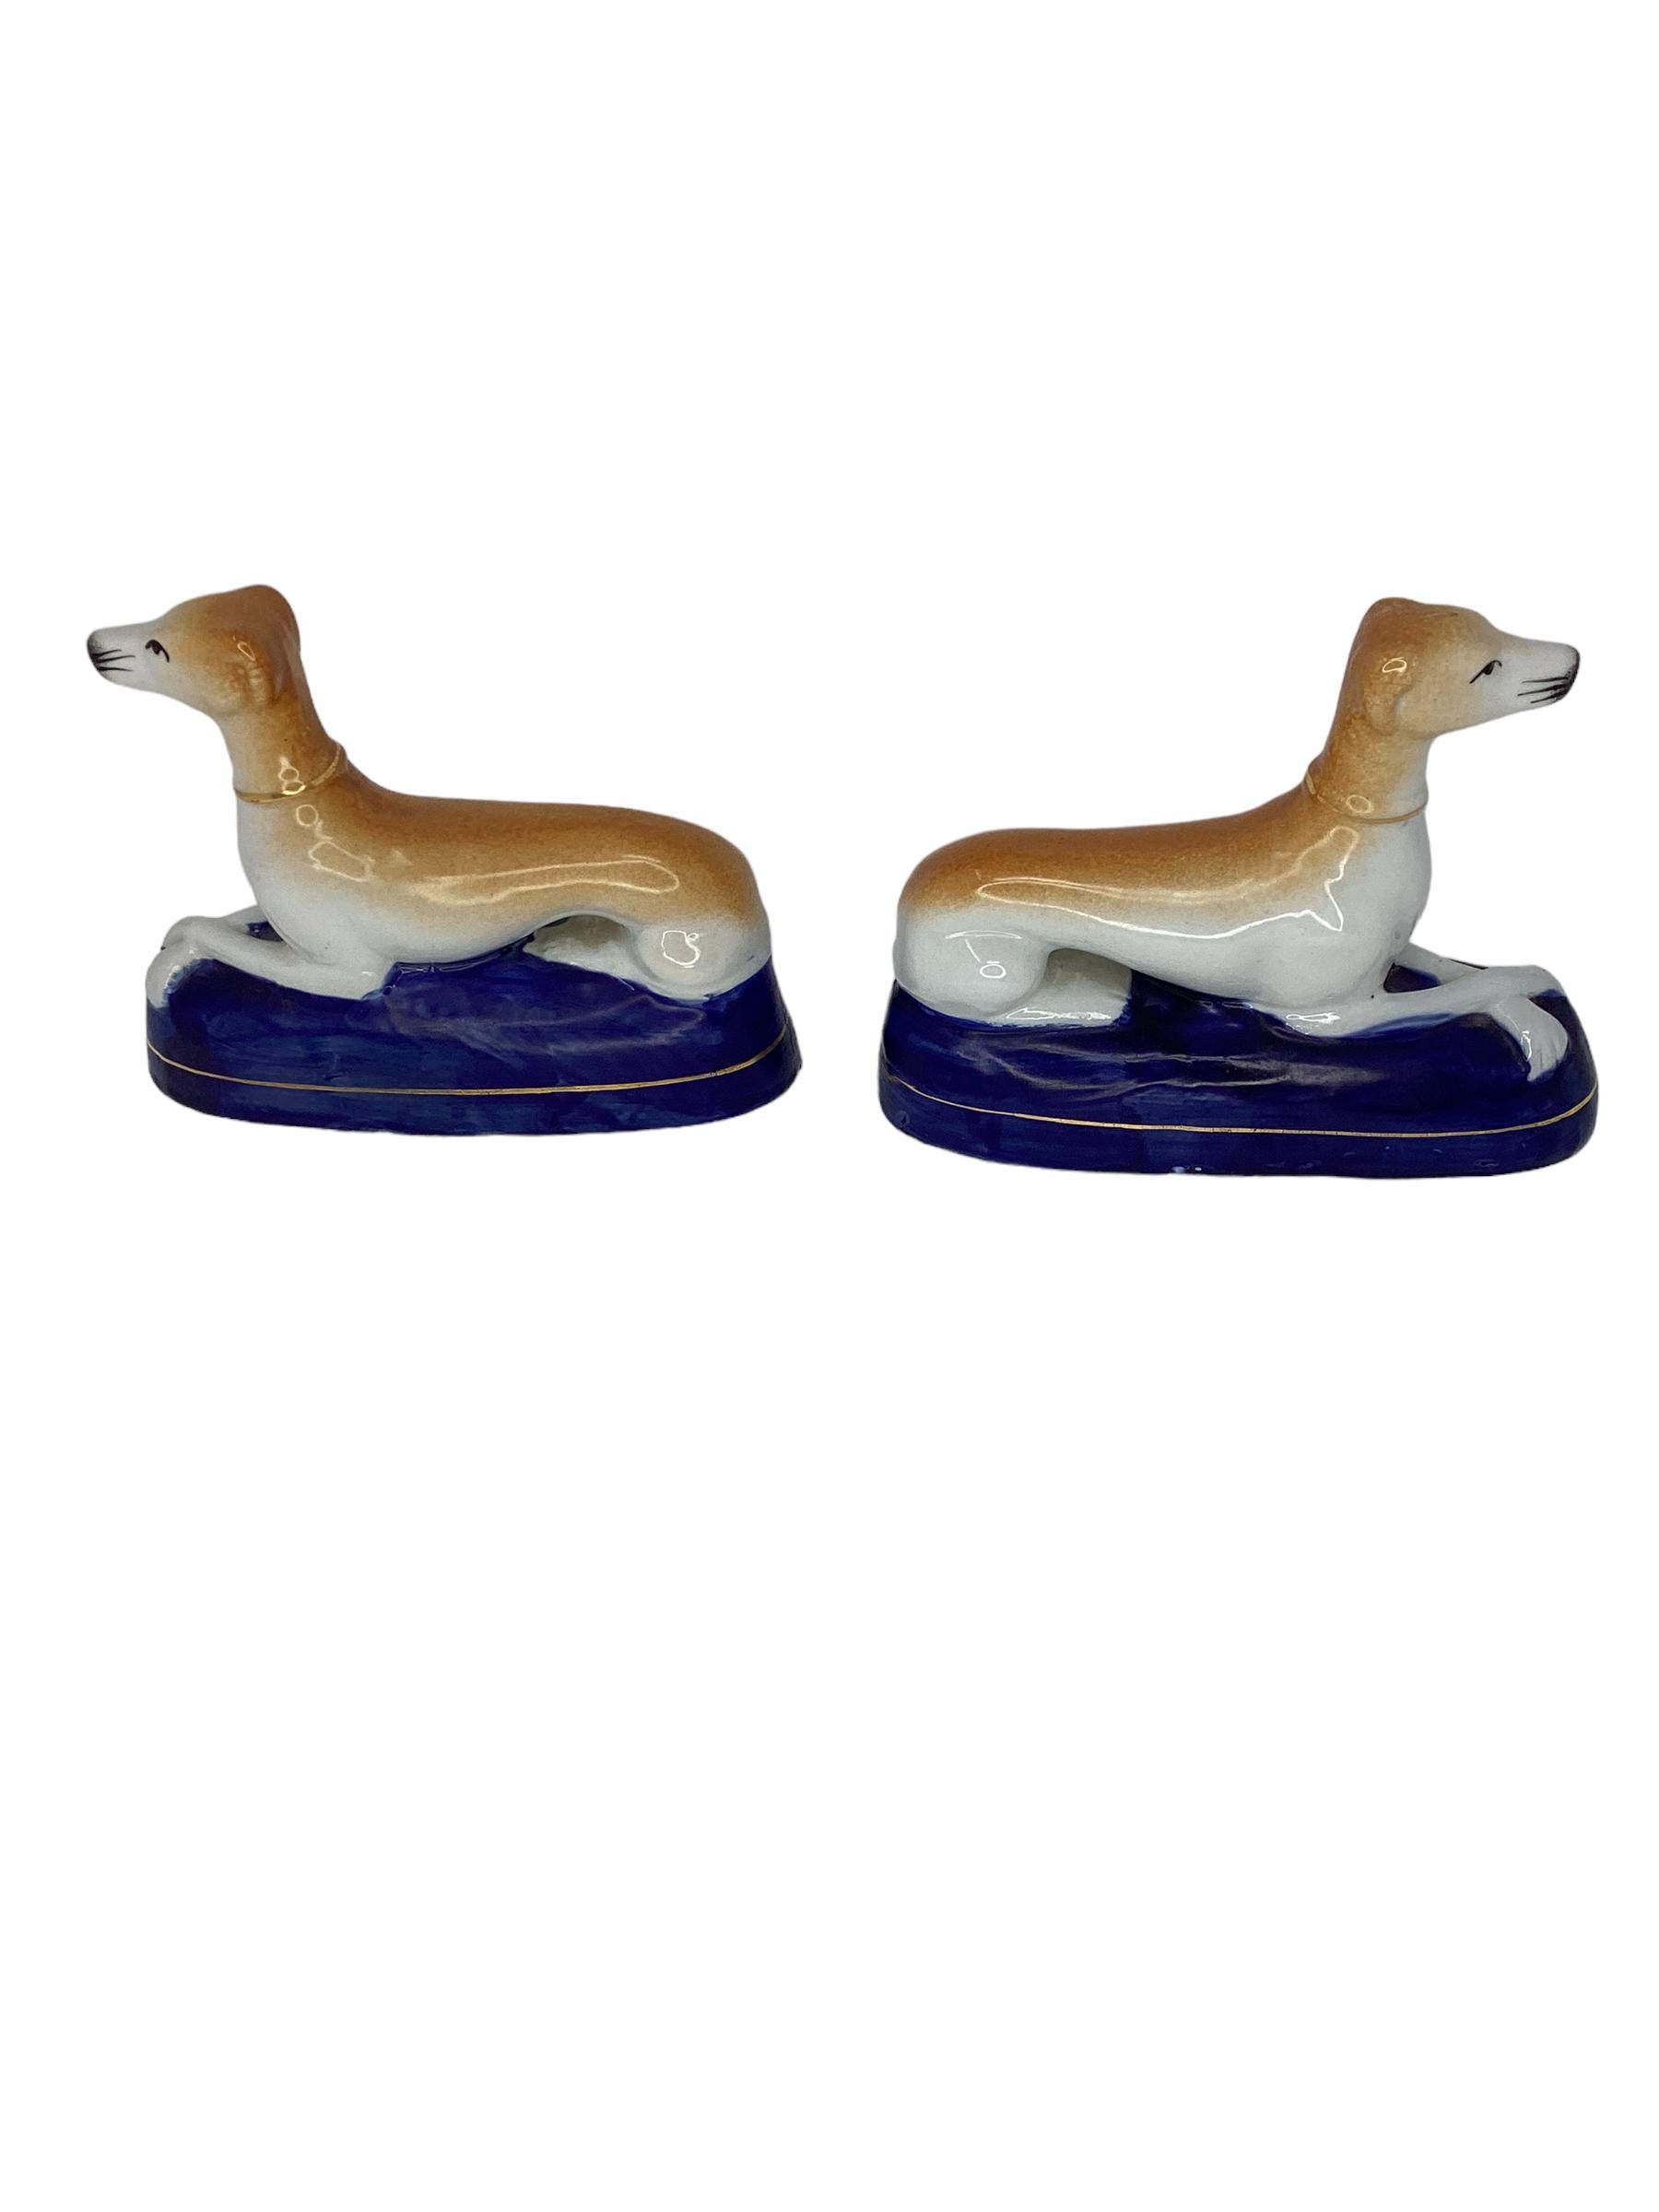 English Pair of Staffordshire Pottery Greyhound or Whippets